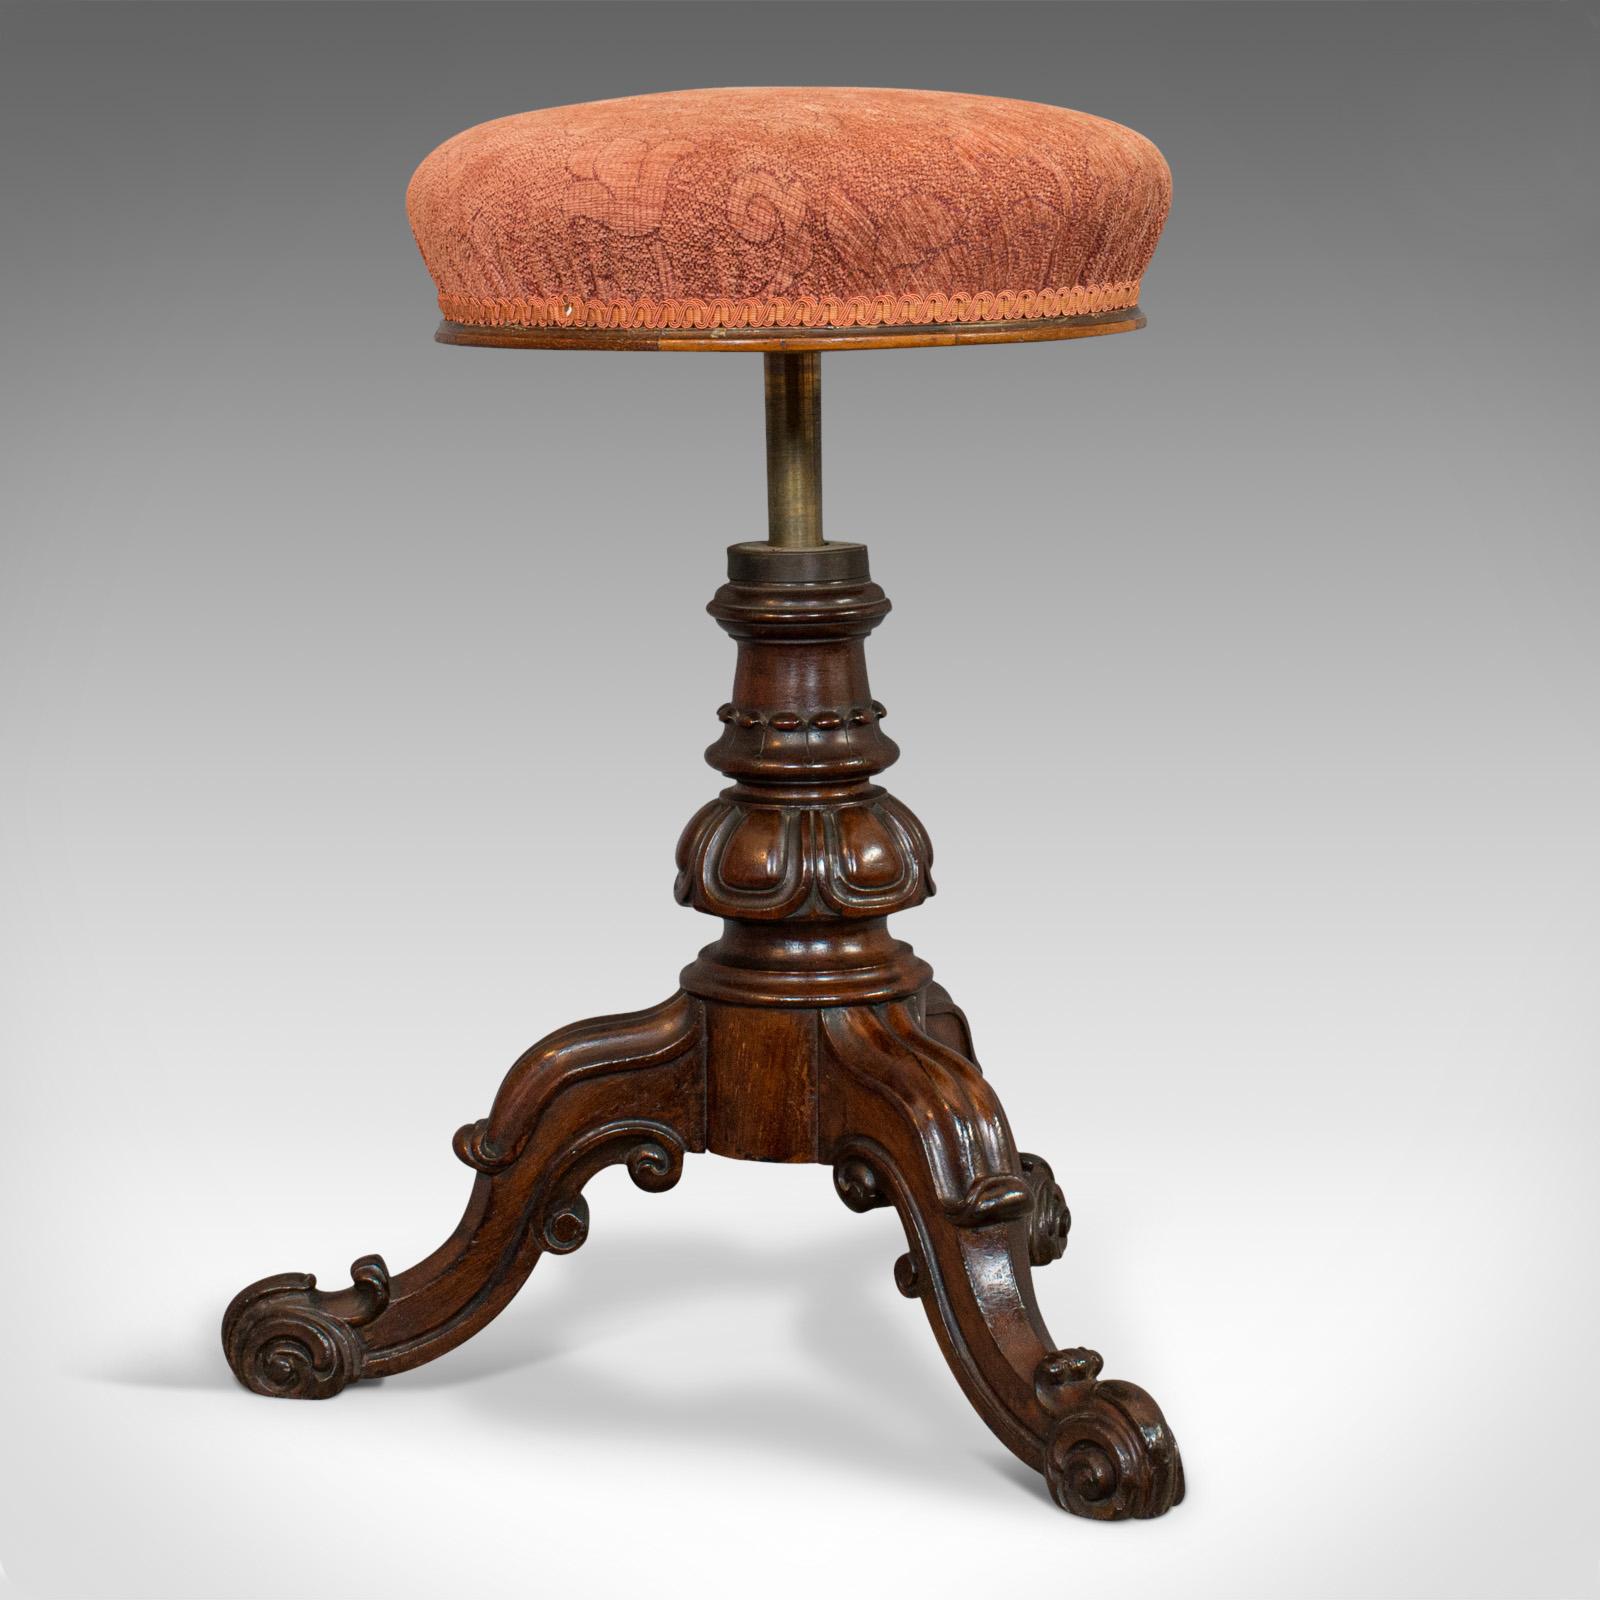 This is an antique music stool. An English, walnut adjustable piano recital stool, dating to the mid-19th century, circa 1850.

Attractive music stool with adjustable height
Displays a desirable aged patina
Walnut shows fine grain